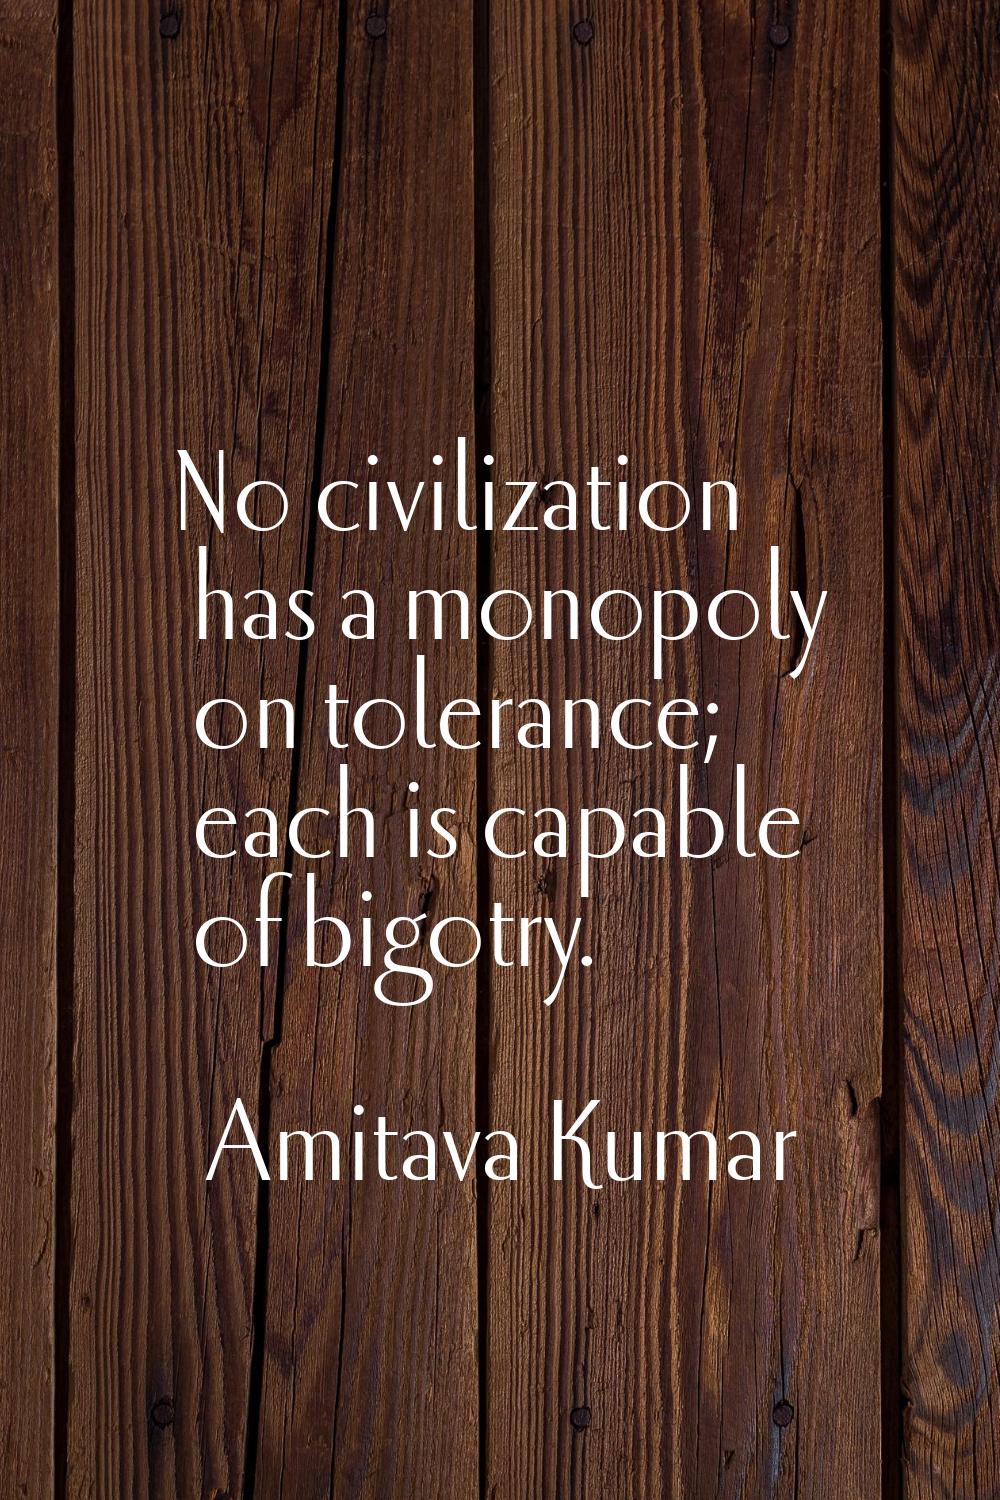 No civilization has a monopoly on tolerance; each is capable of bigotry.